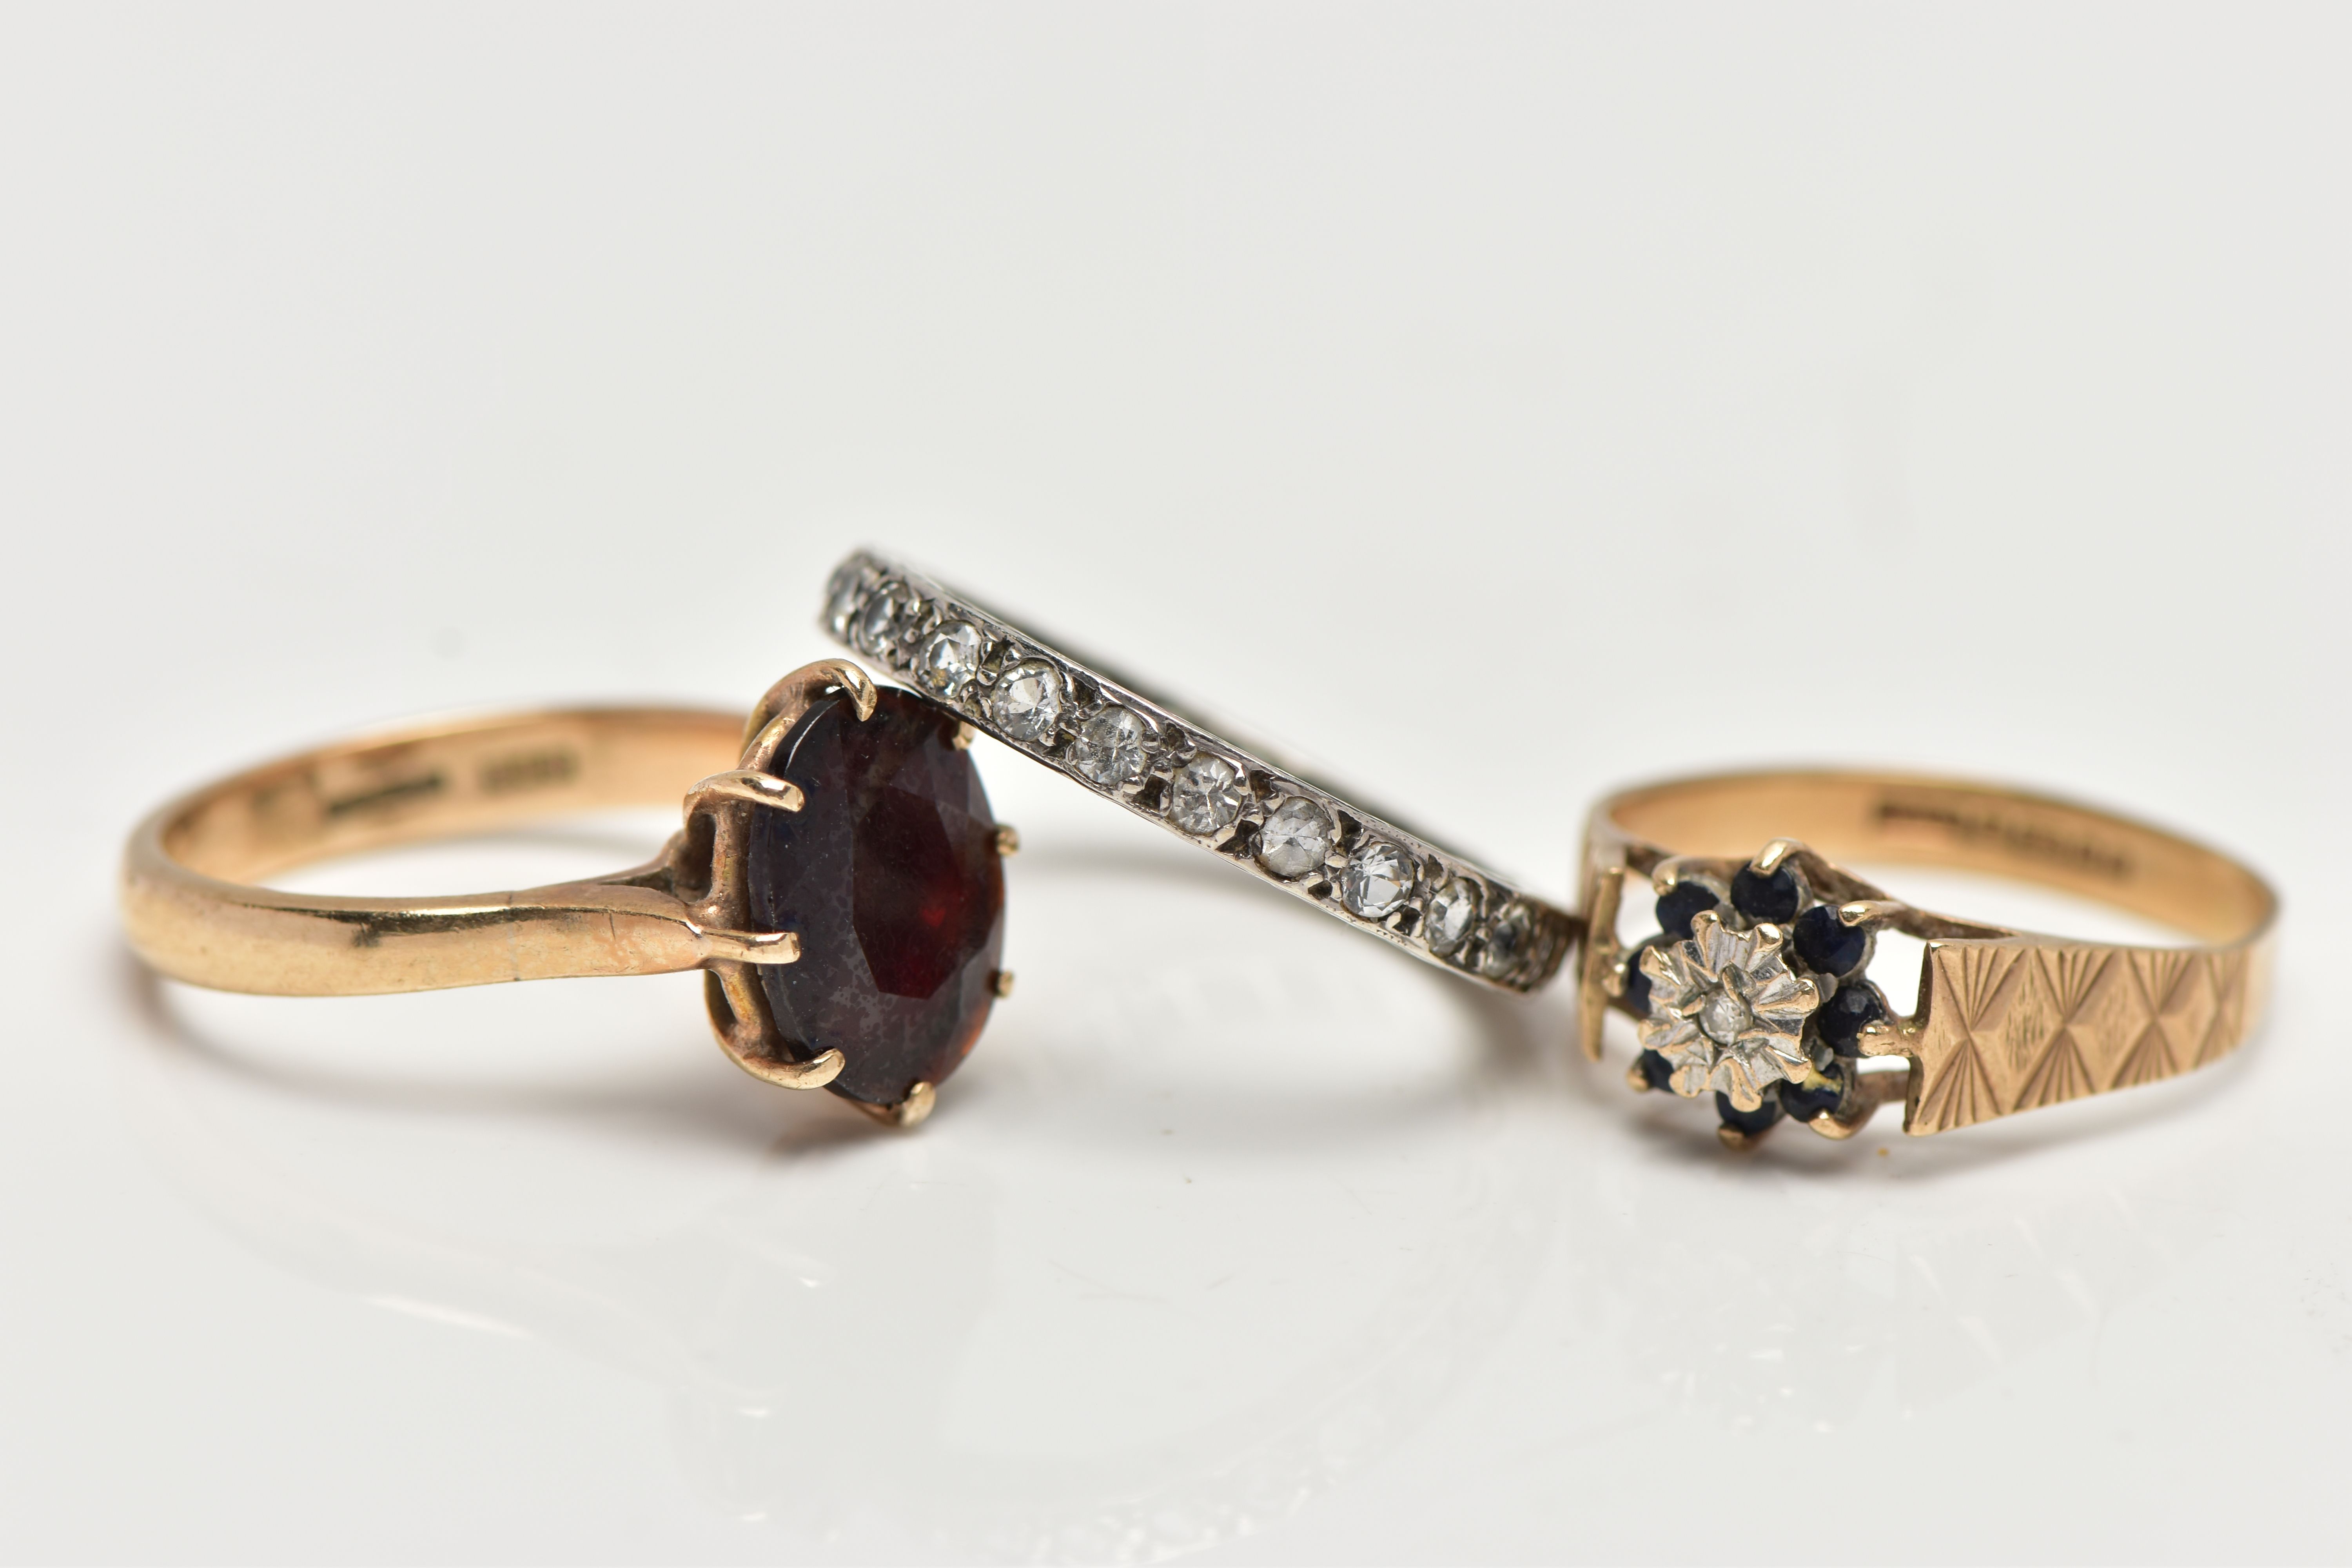 THREE GEM SET RINGS, the first designed with an oval cut garnet in an eight claw setting with - Image 2 of 4